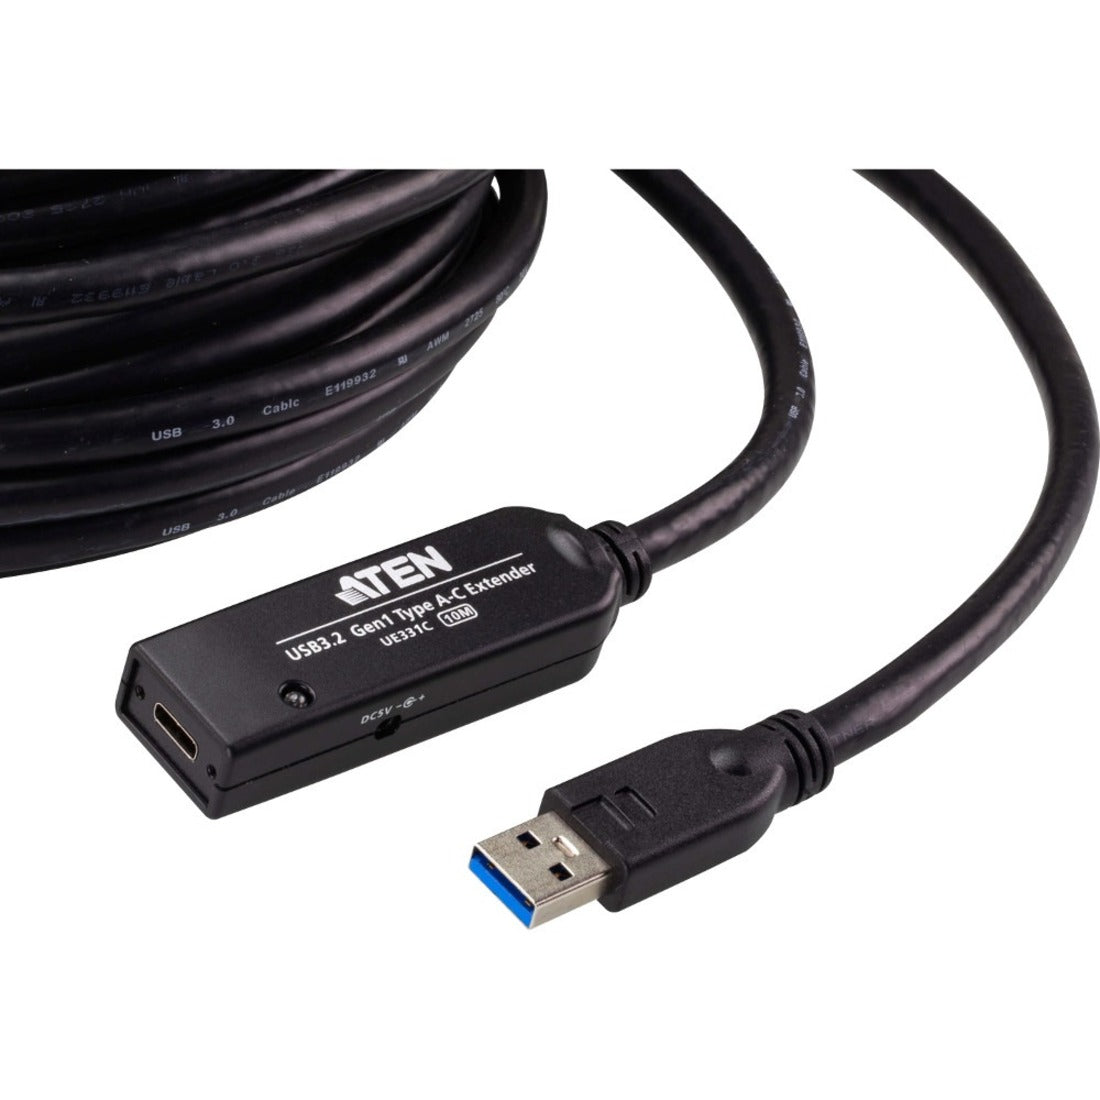 ATEN UE331C 10 M USB 3.2 Gen1 Extender Cable, Plug & Play, Flexible, 32.81 ft Data Transfer Cable